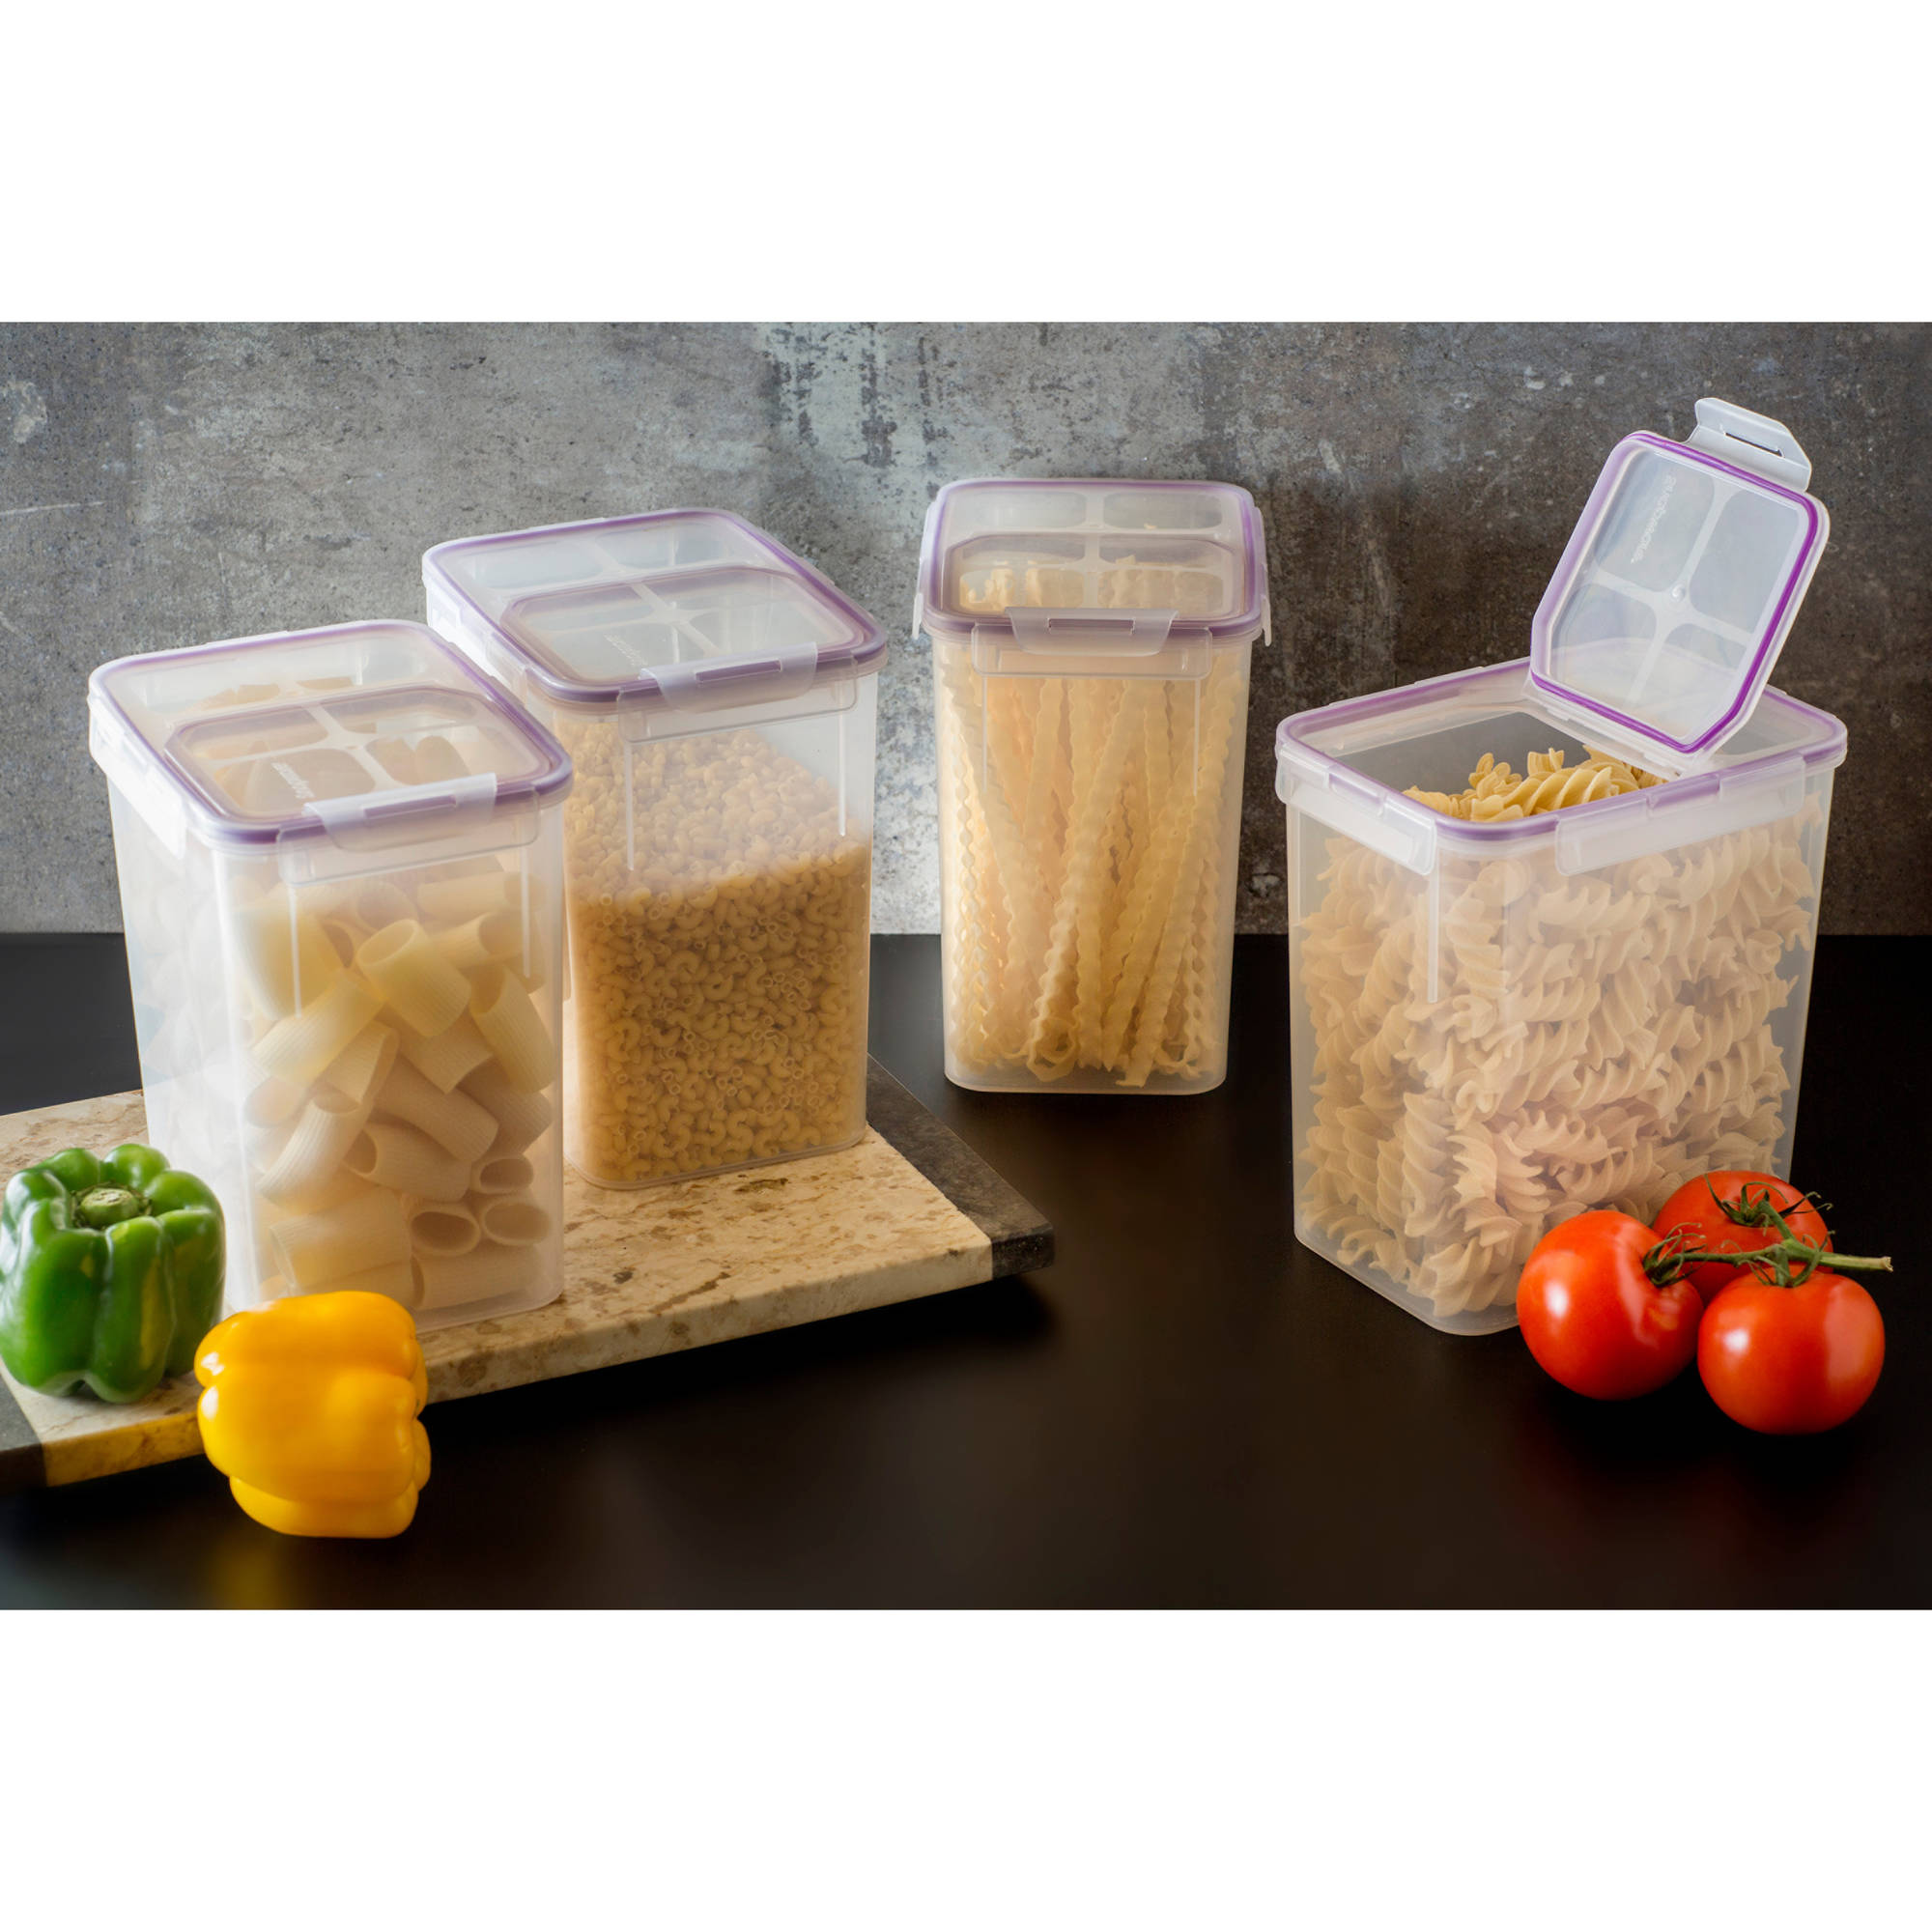 Snapware Airtight Plastic 23-Cup Flip top Food Storage Container, 4-Pack - image 1 of 3